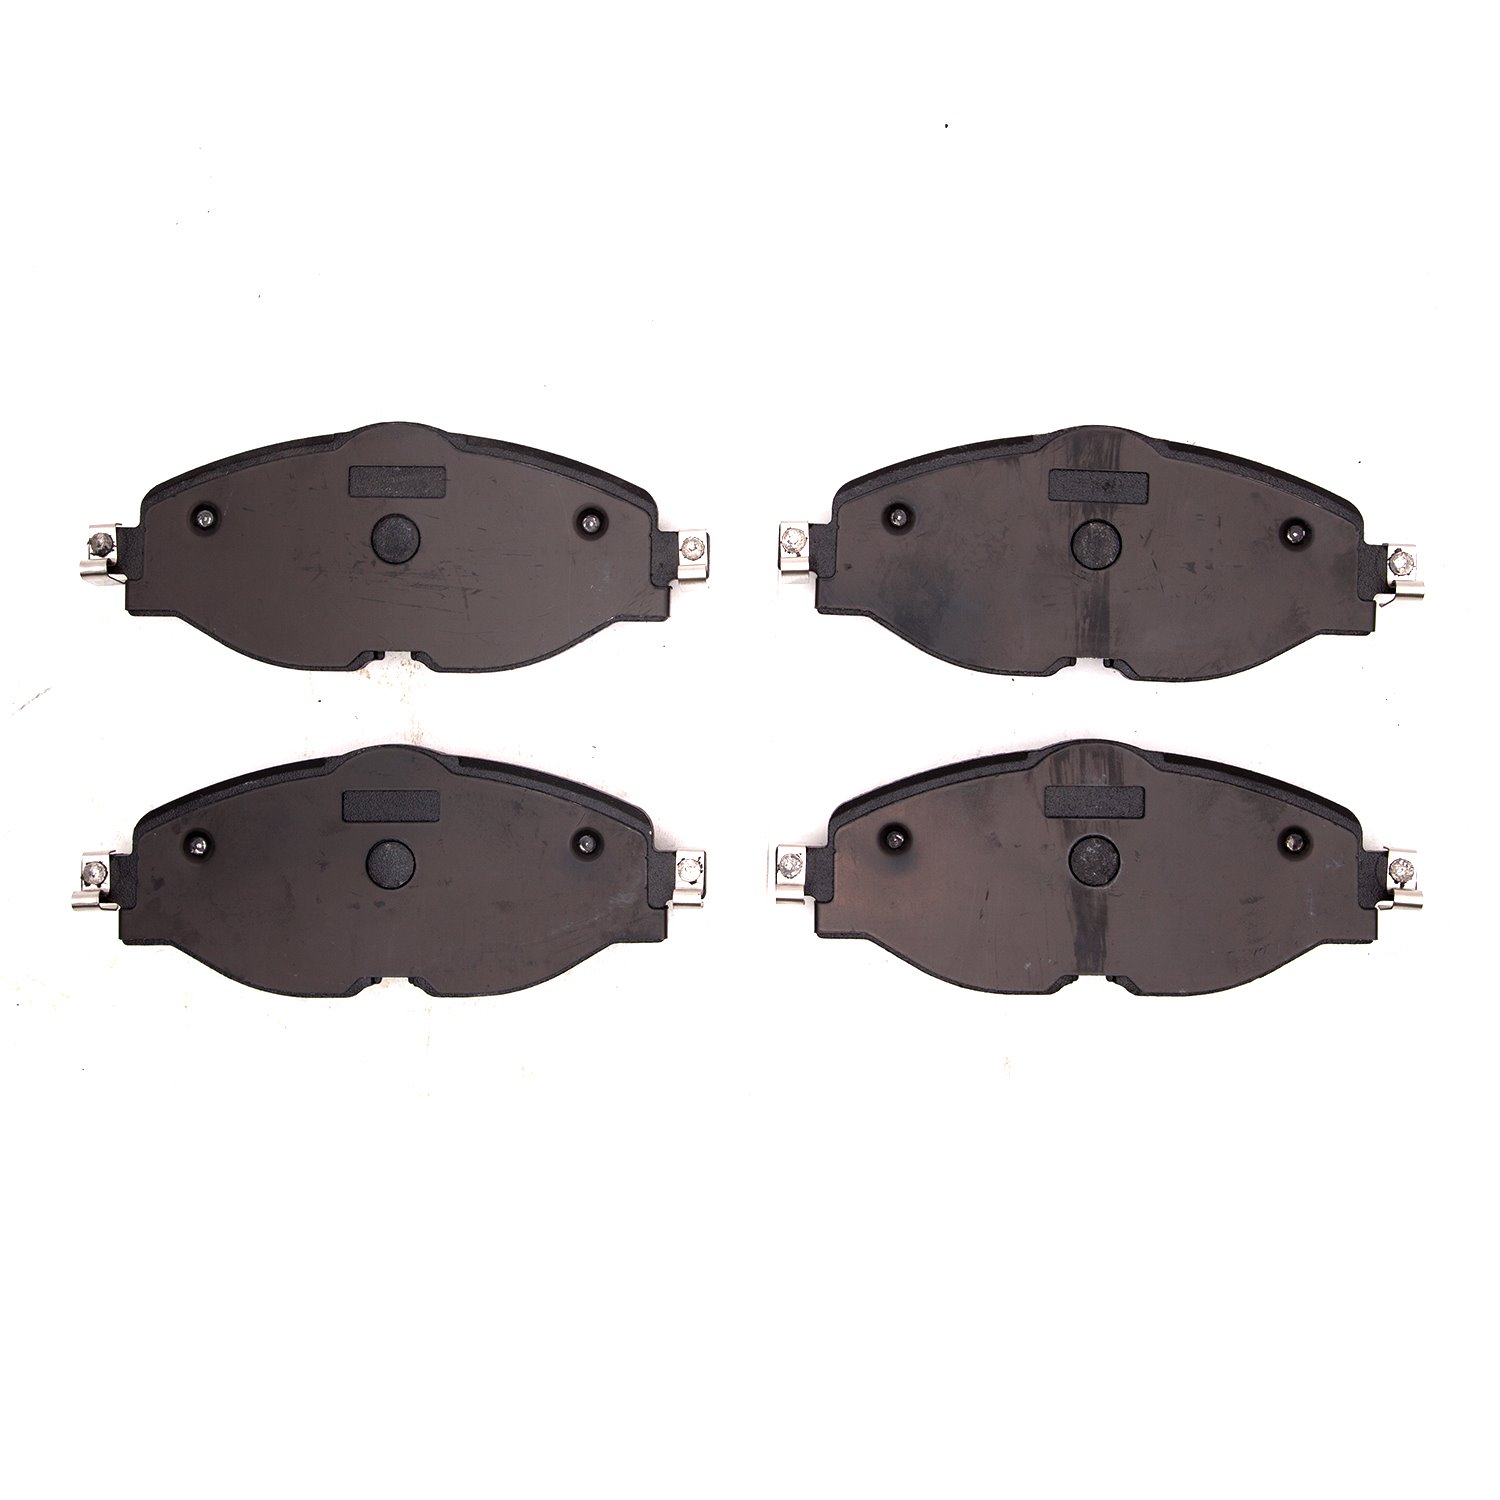 1000-1760-00 Track/Street Low-Metallic Brake Pads Kit, Fits Select Multiple Makes/Models, Position: Front